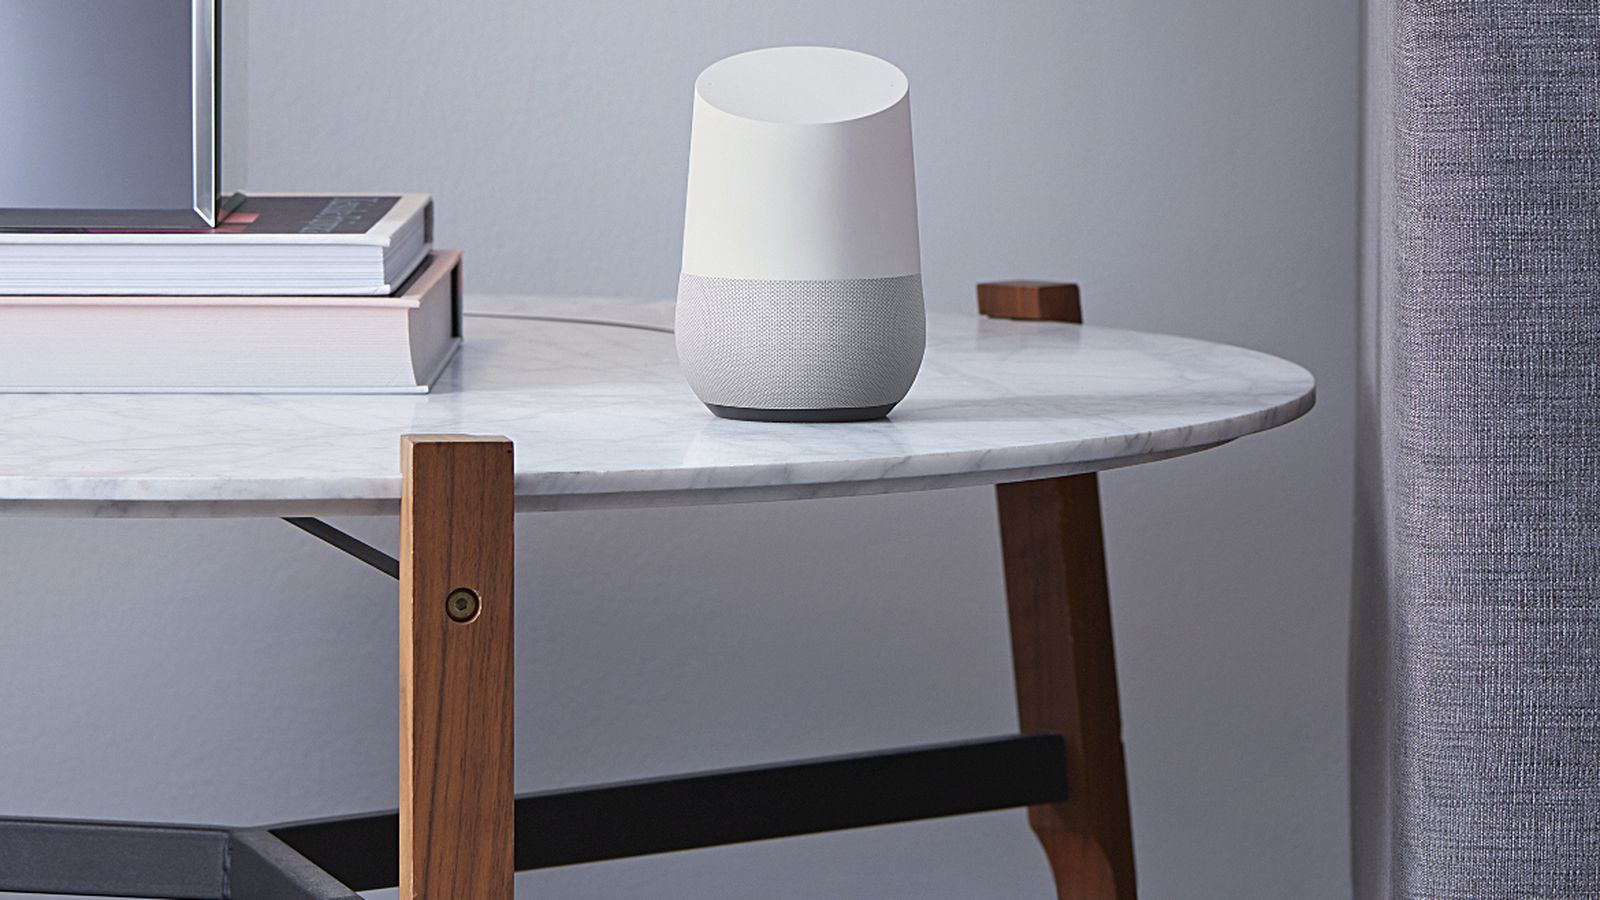 Google home review, smarthome products